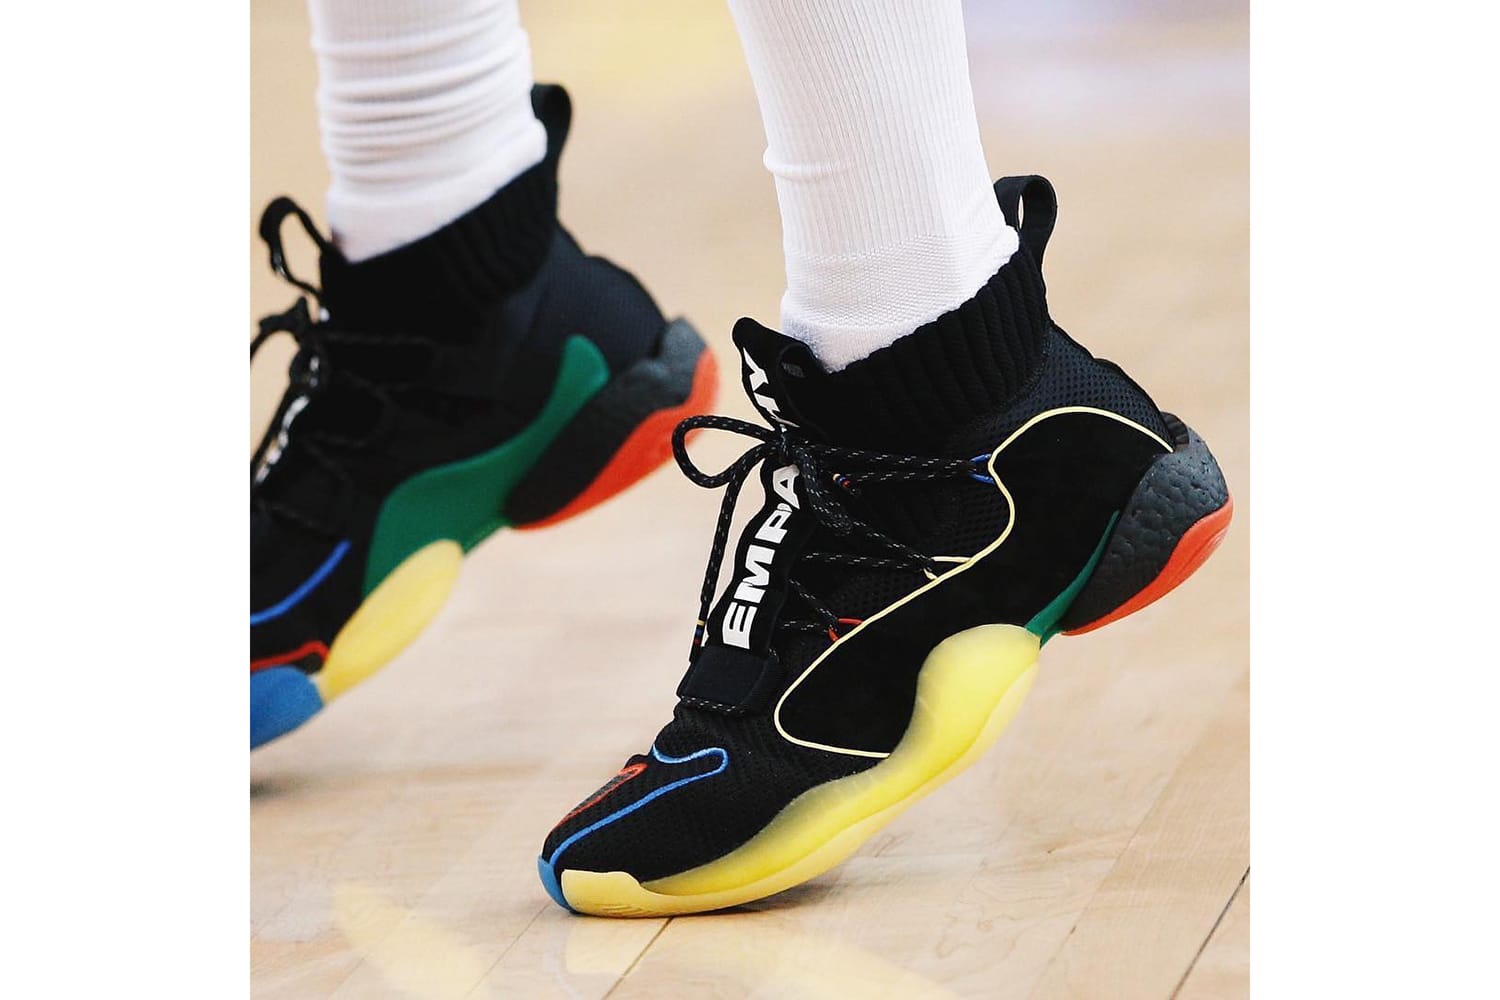 Nick Young Teases the adidas Crazy BYW 